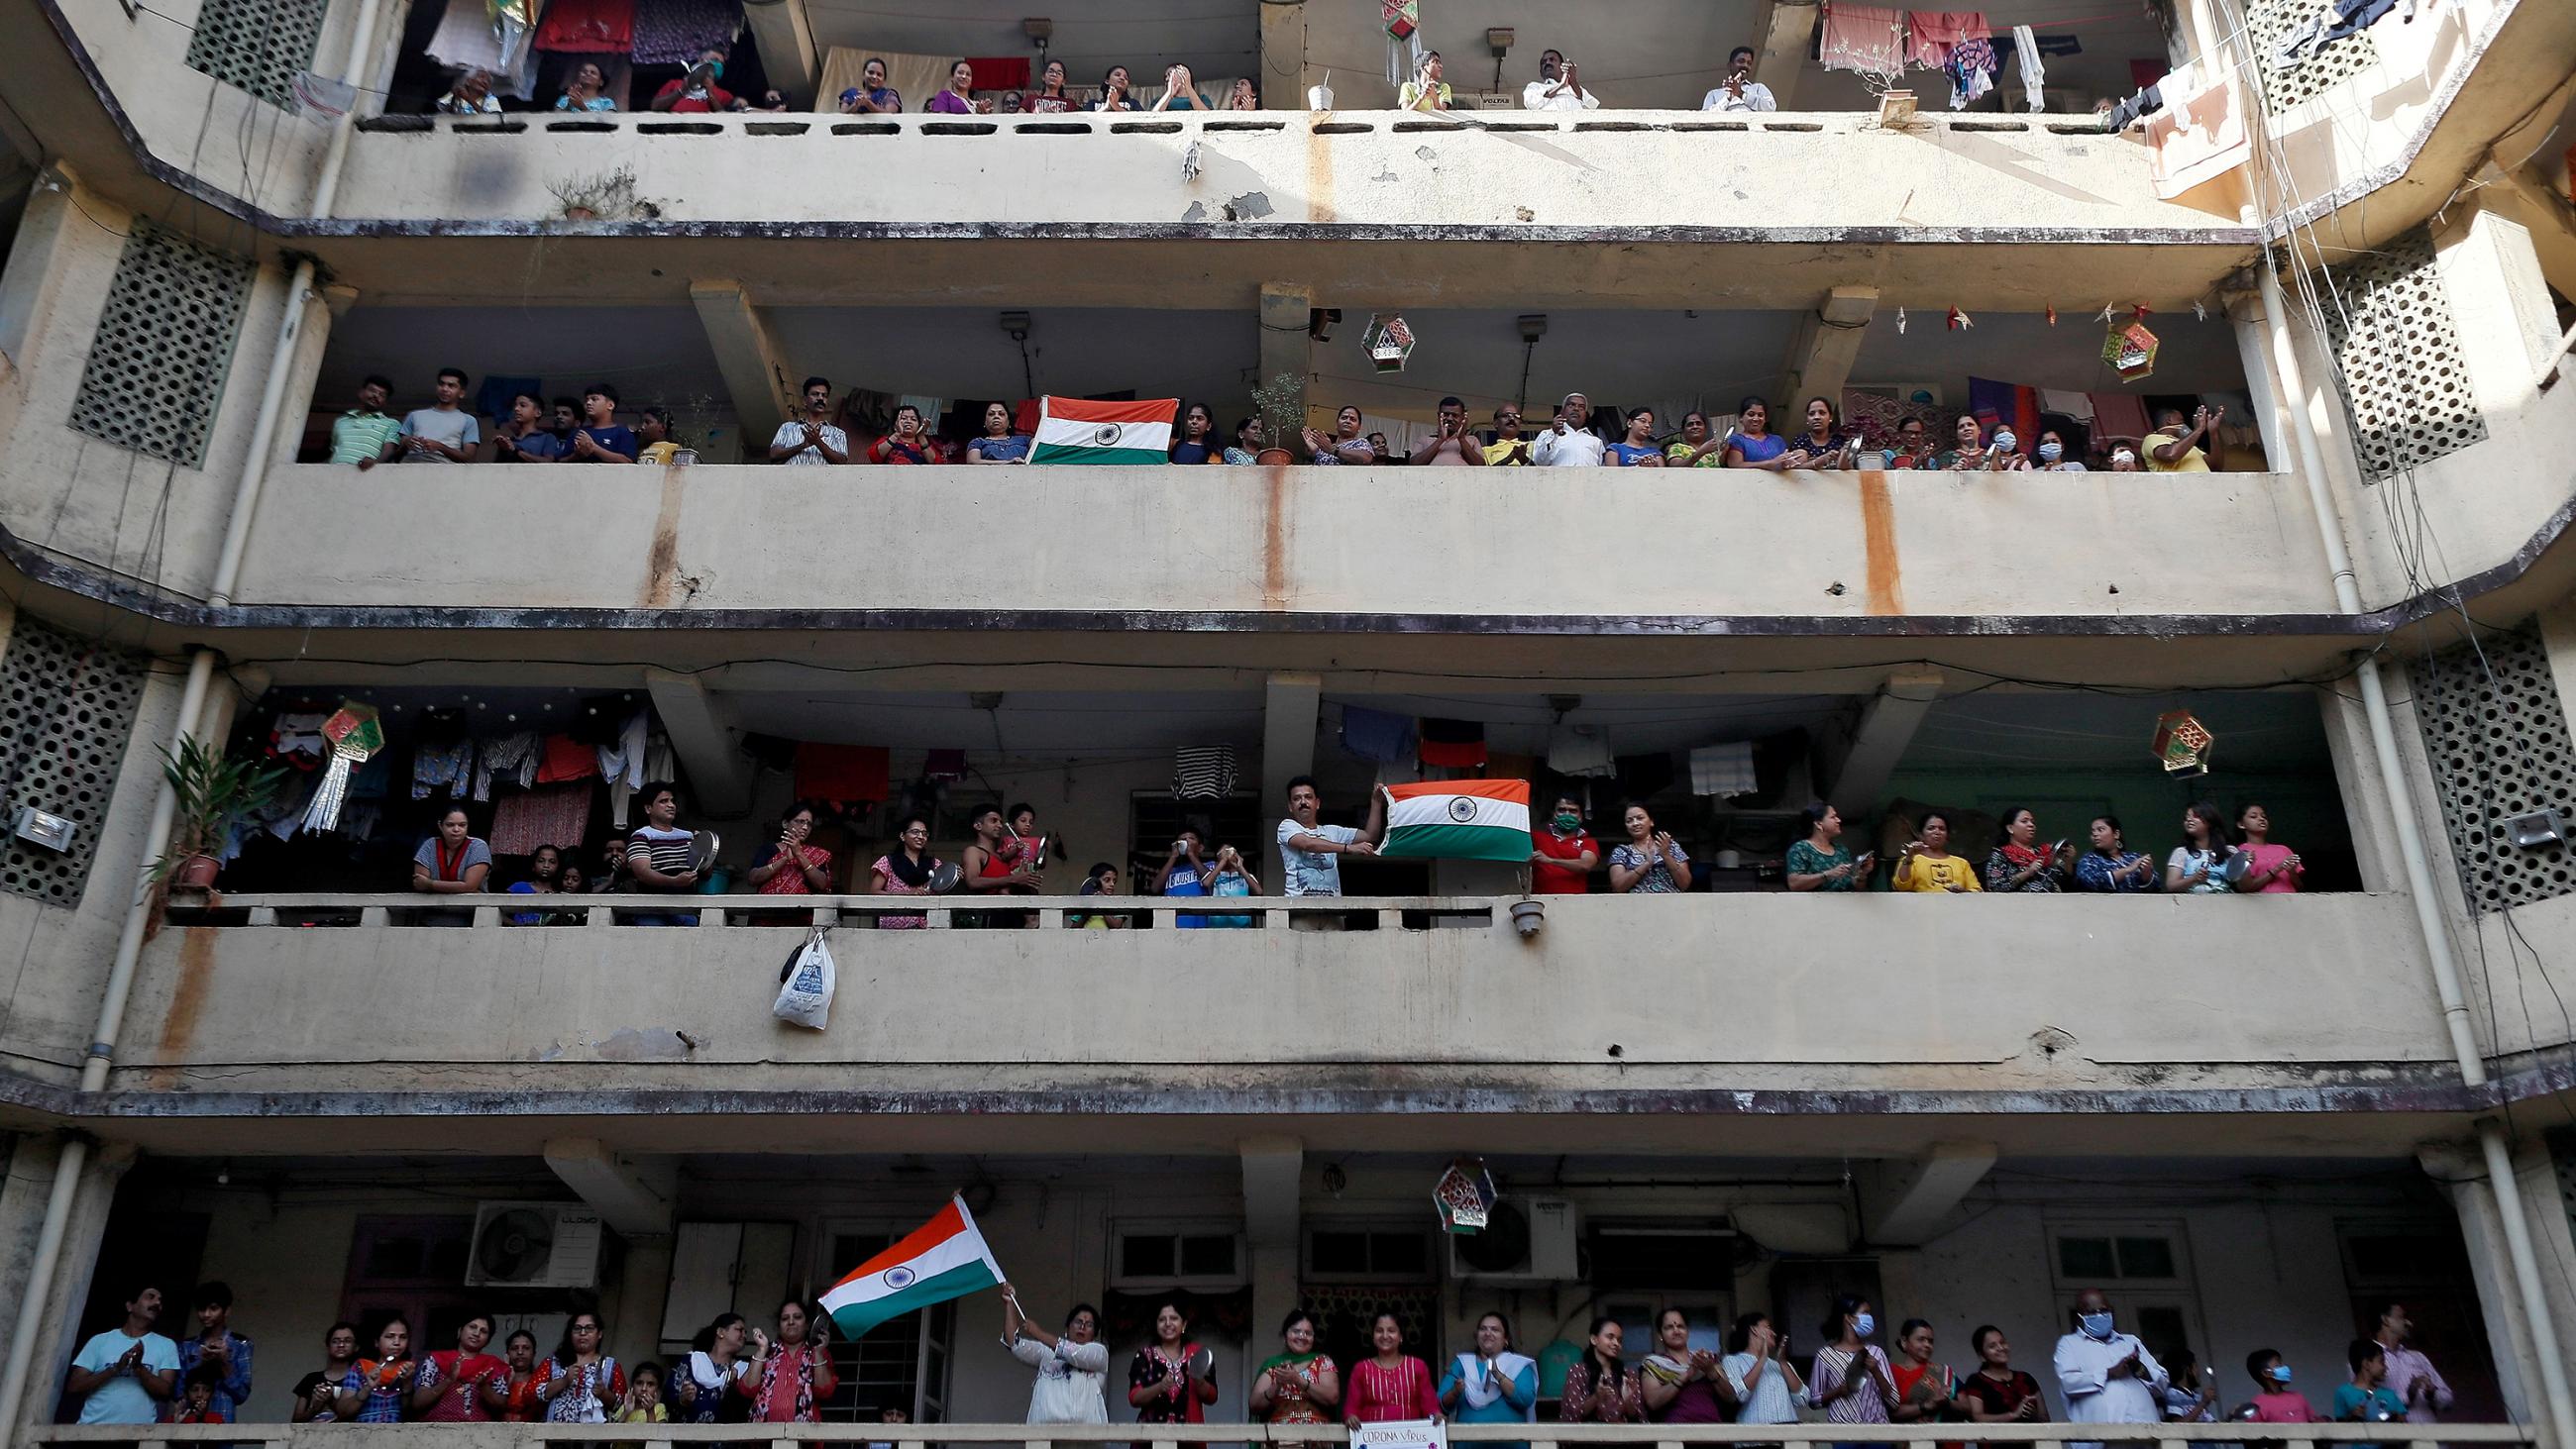 The photo shows three balconies of a large building filled with people cheering. 